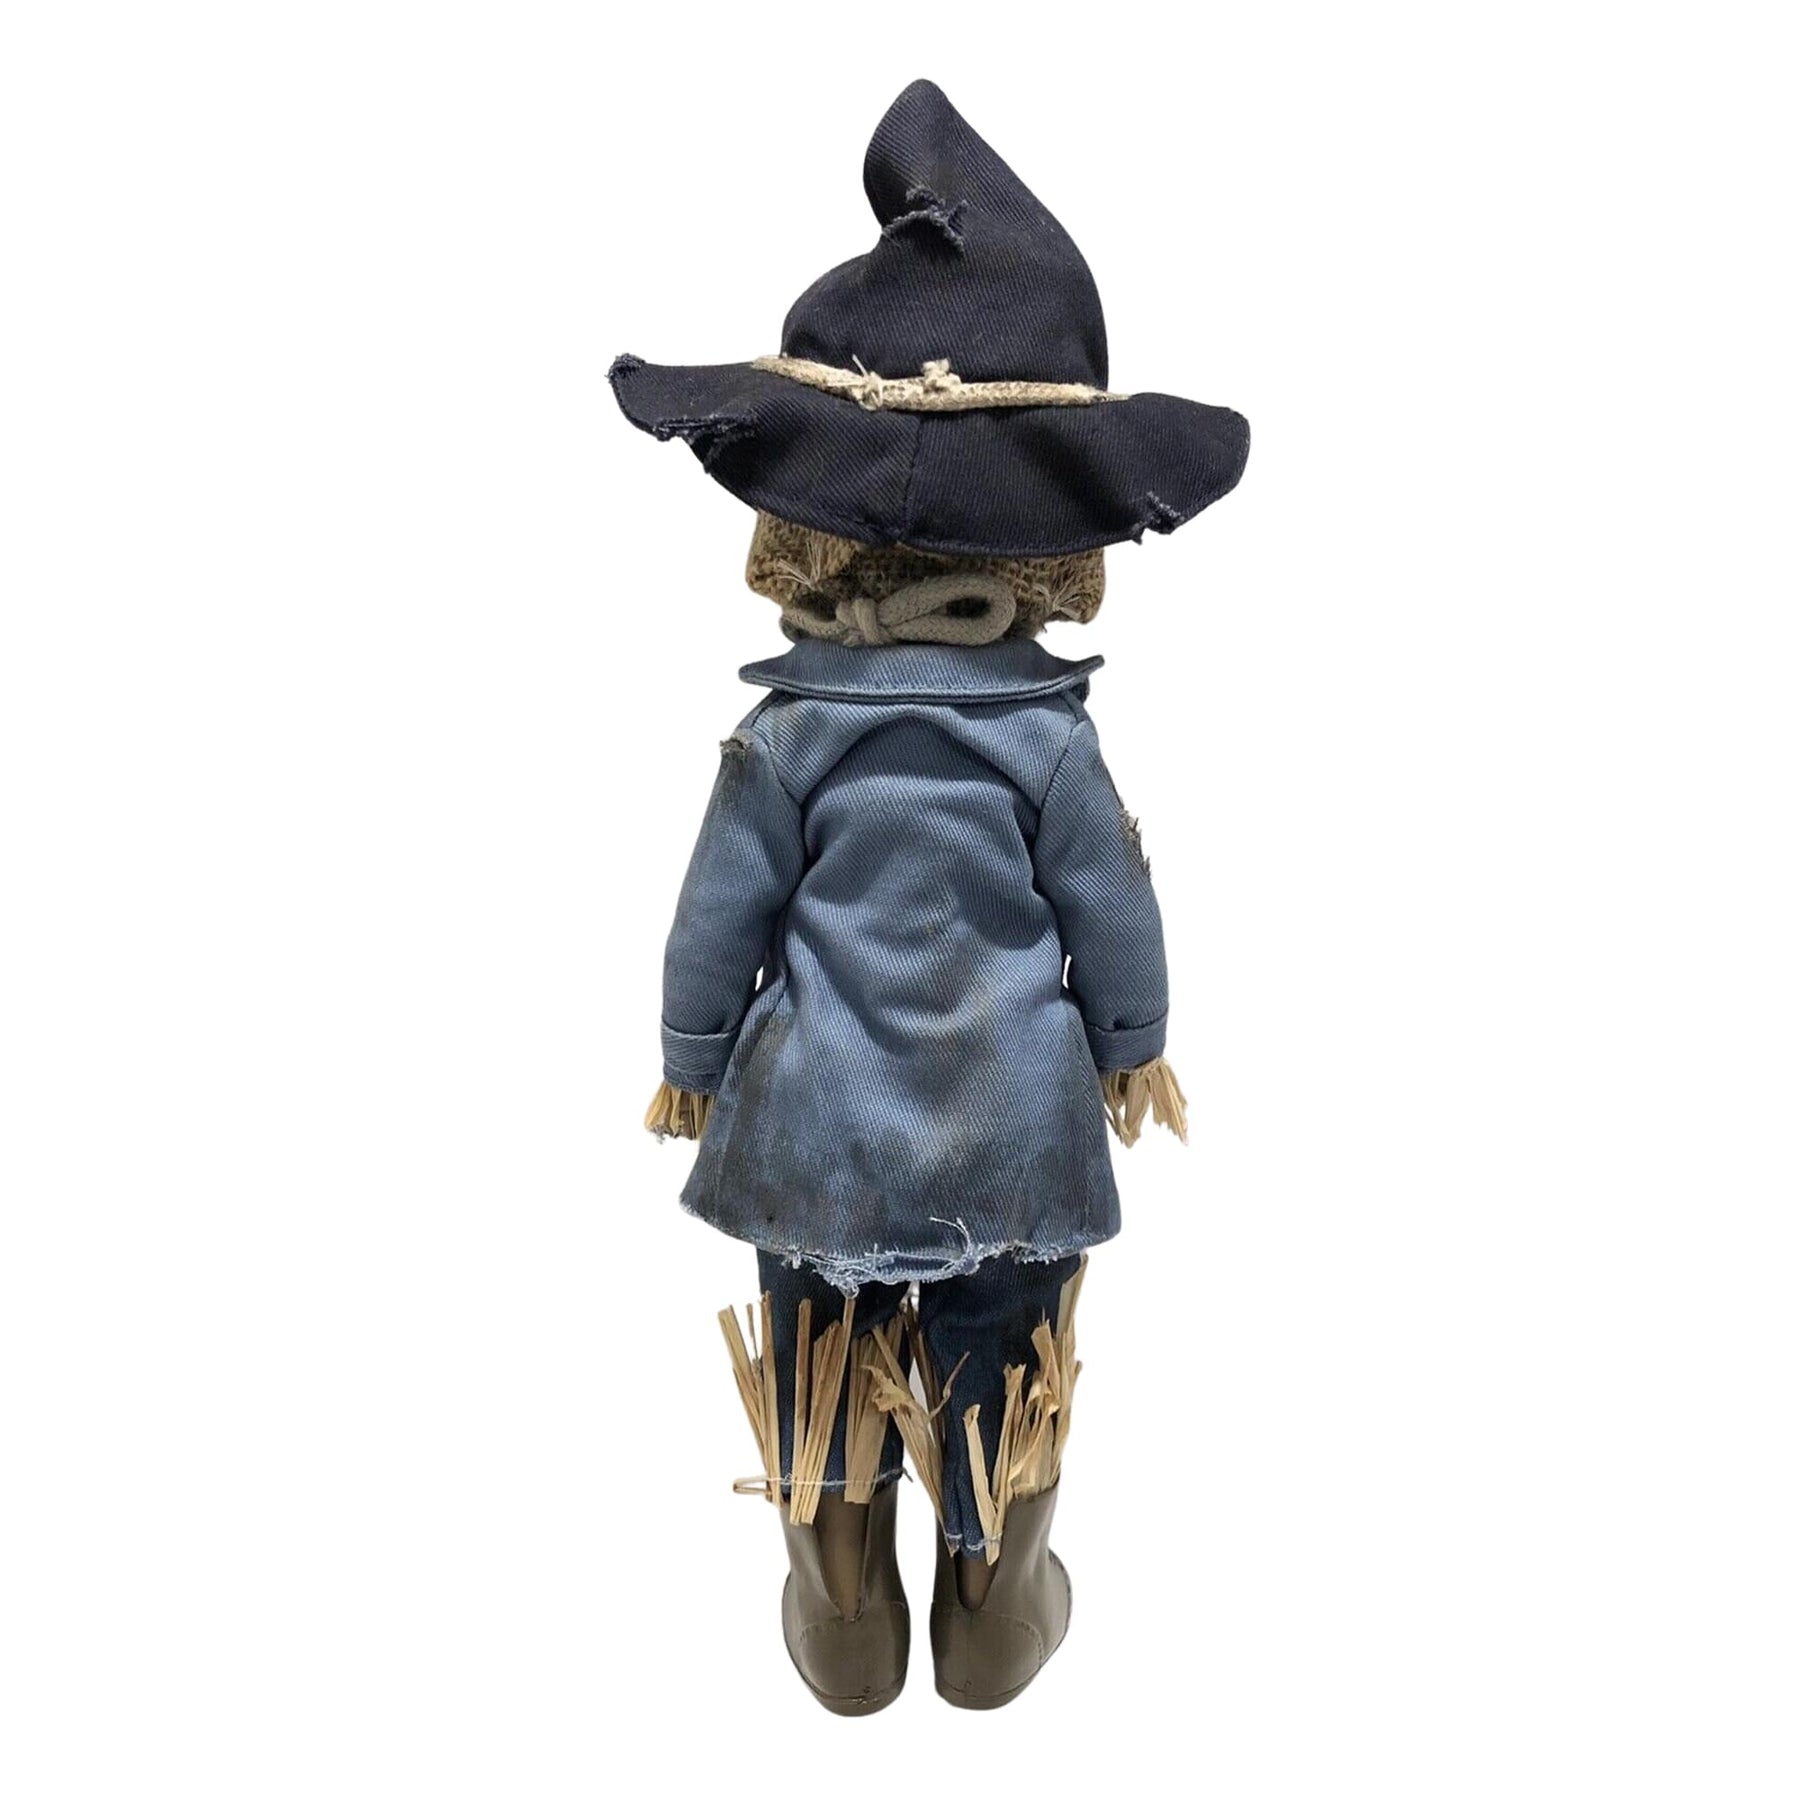 Mezco Toyz Living Dead Dolls The Lost In Oz Purdy As The Scarecrow Doll